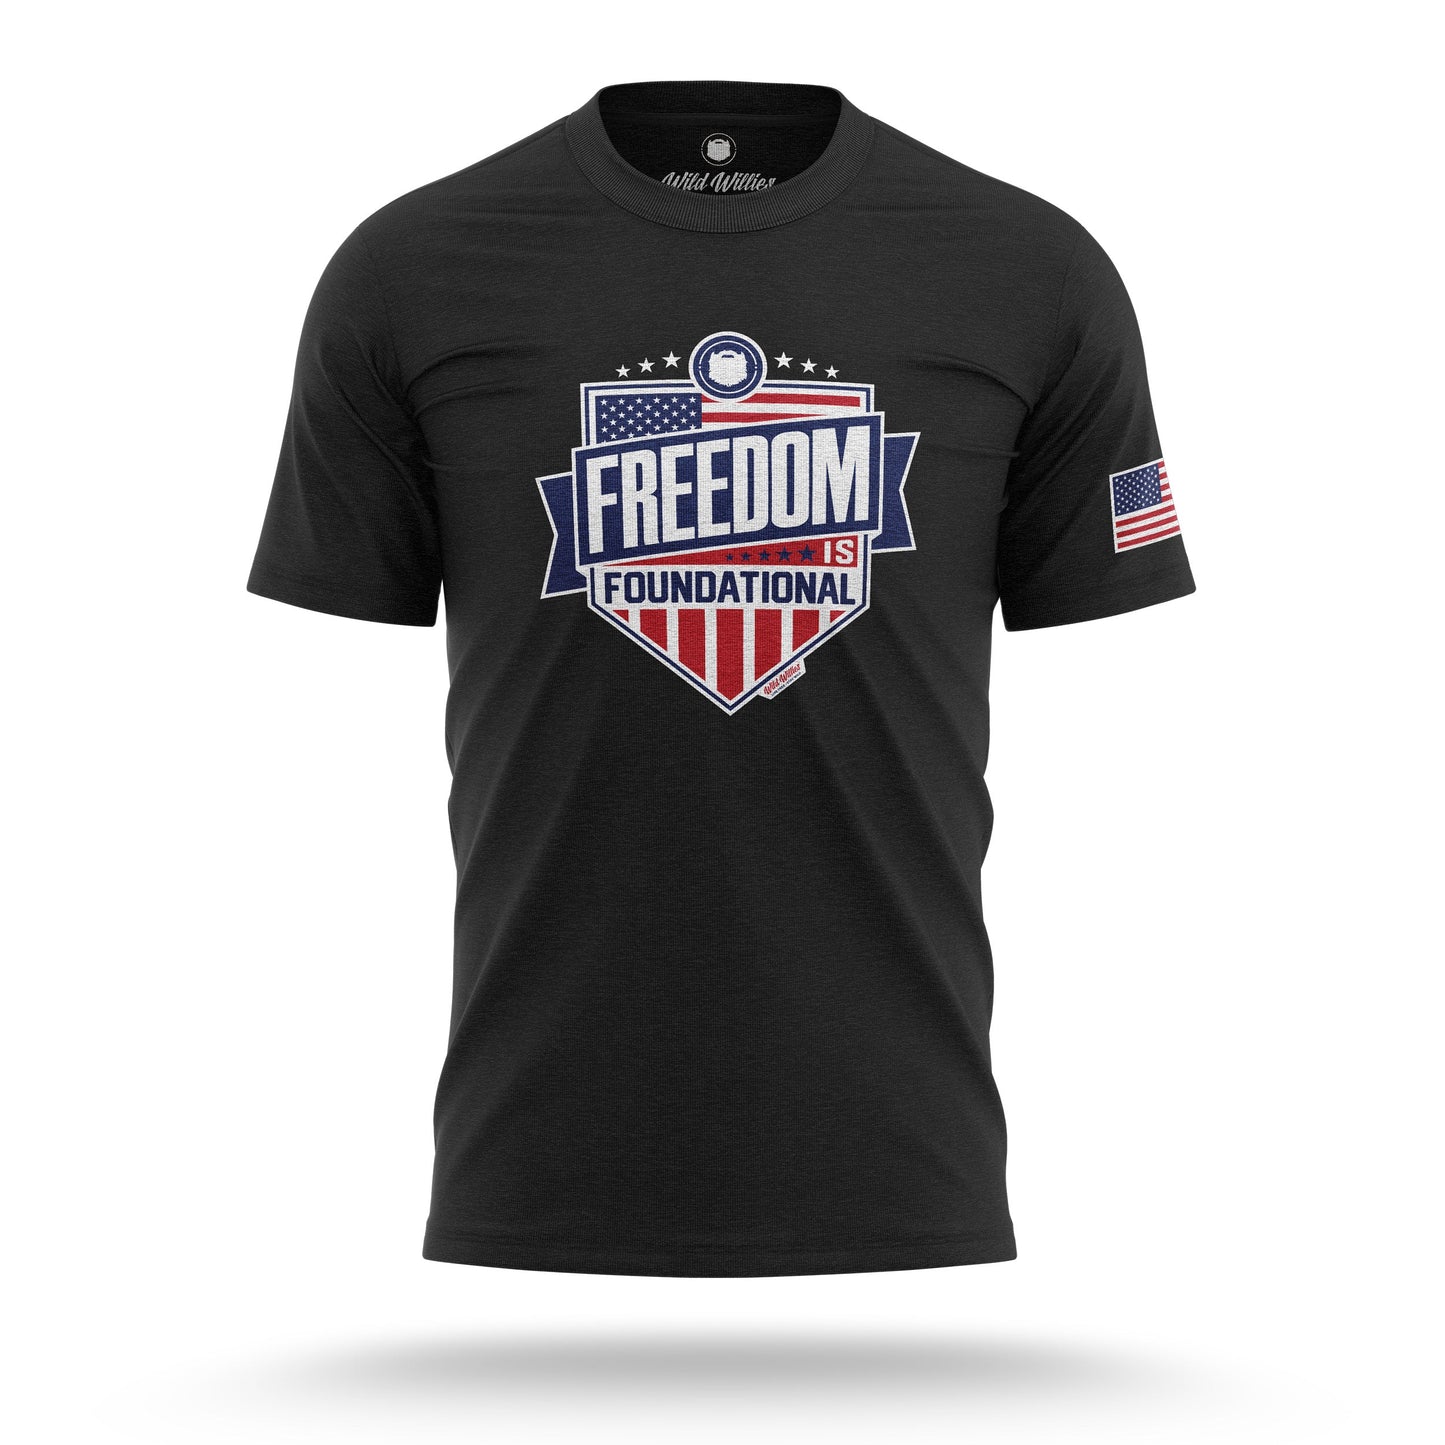 Freedom is Foundational - T-Shirt T-Shirt Wild-Willies S Black 